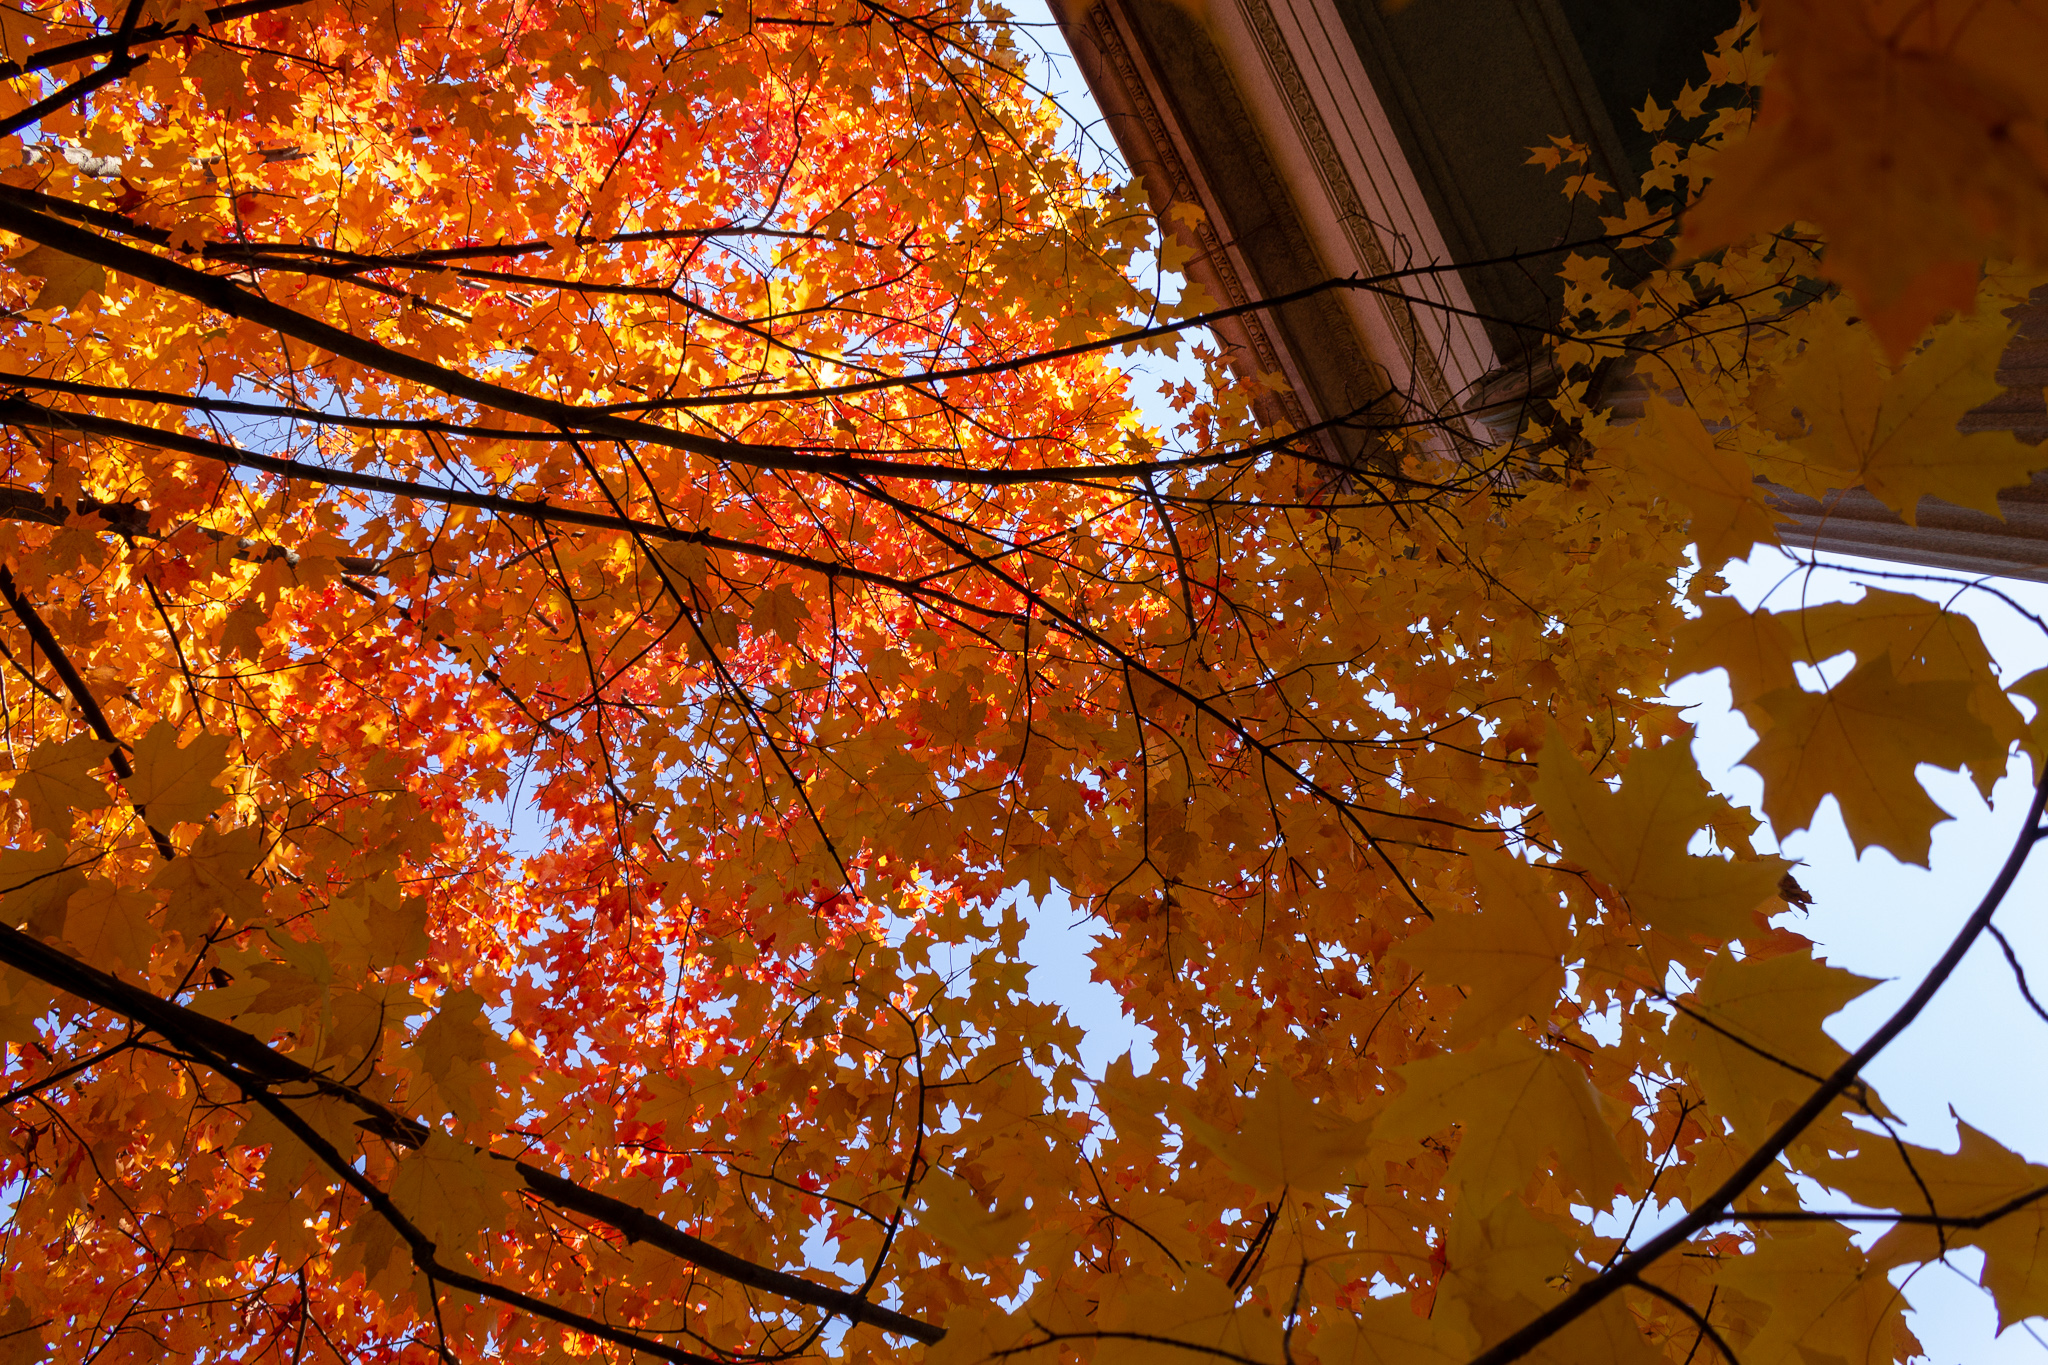 Looking up through the red leaves of a tall maple tree